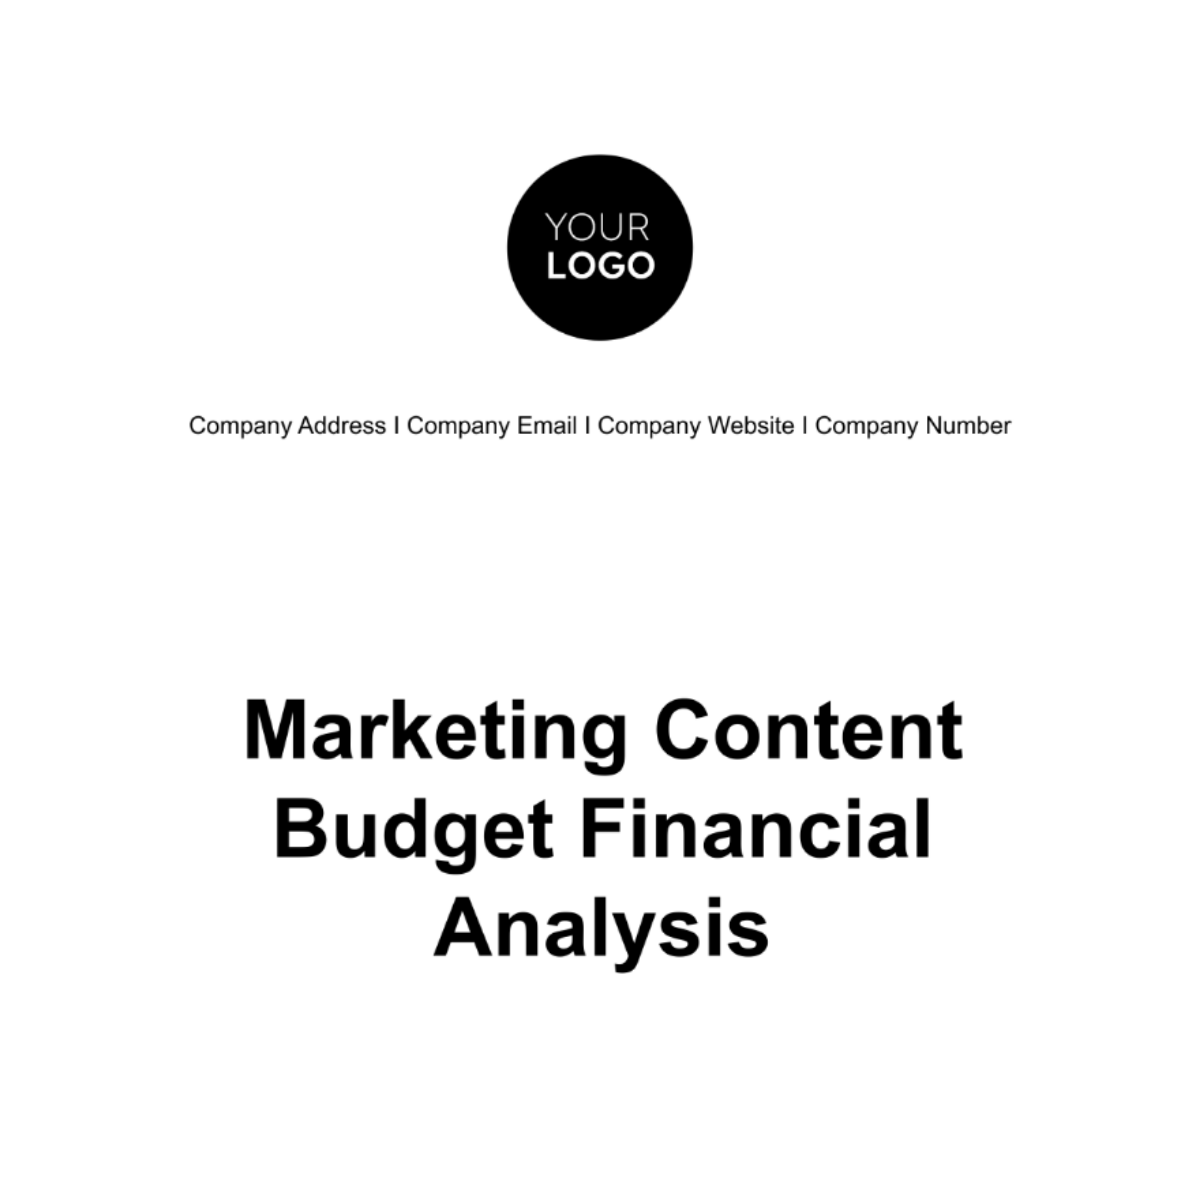 Marketing Content Budget Financial Analysis Template